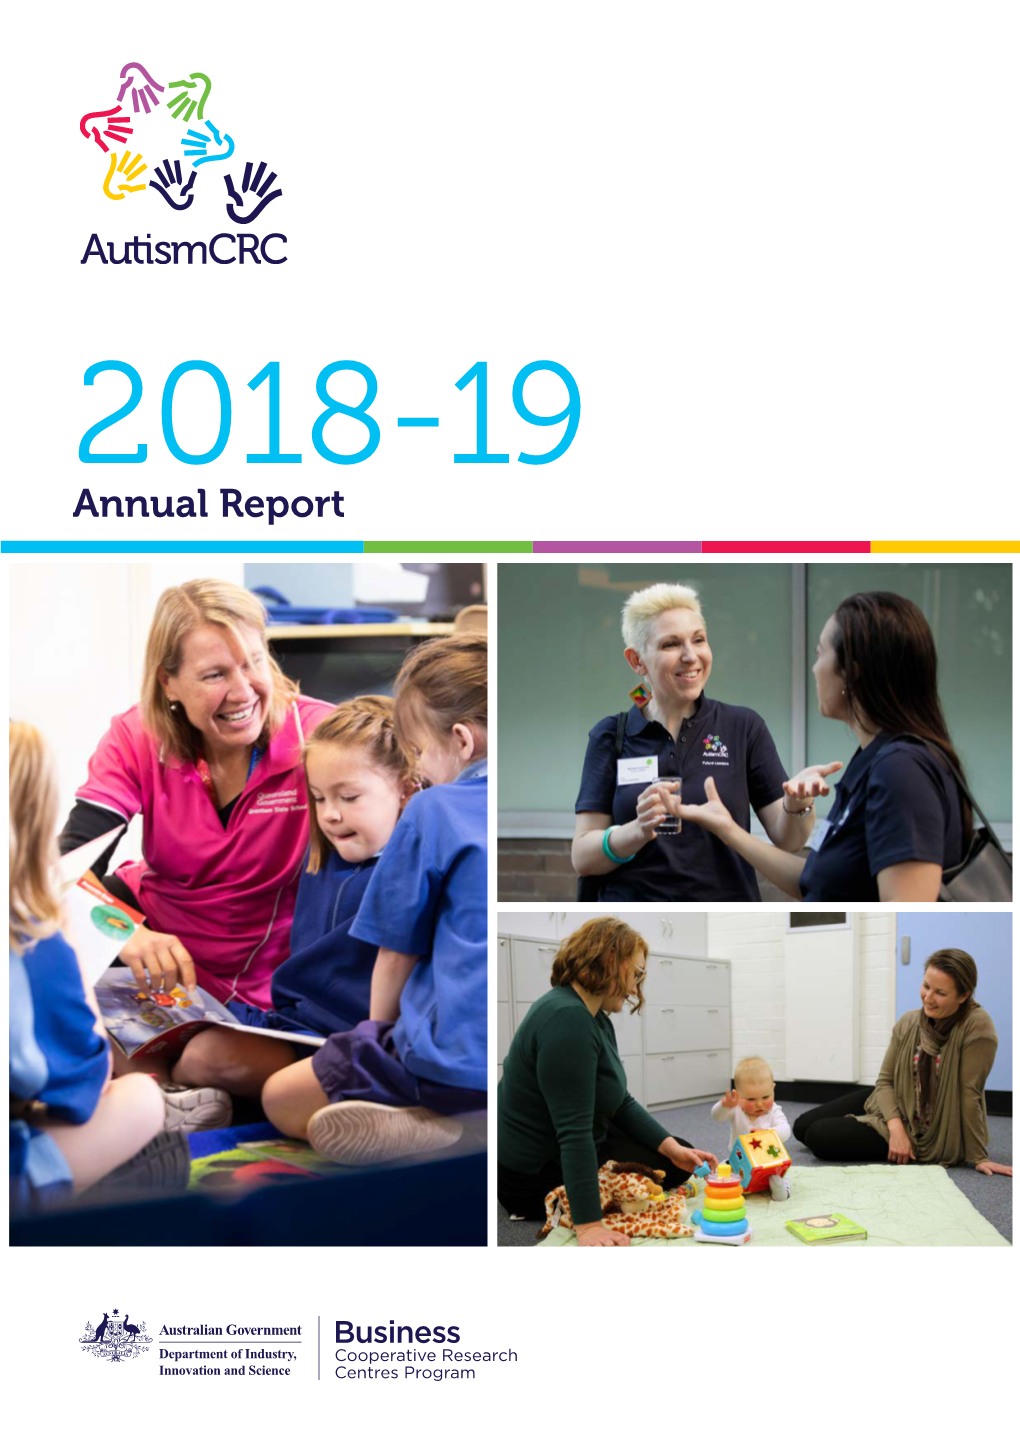 Autism CRC Annual Report 2018-19 About Autism CRC